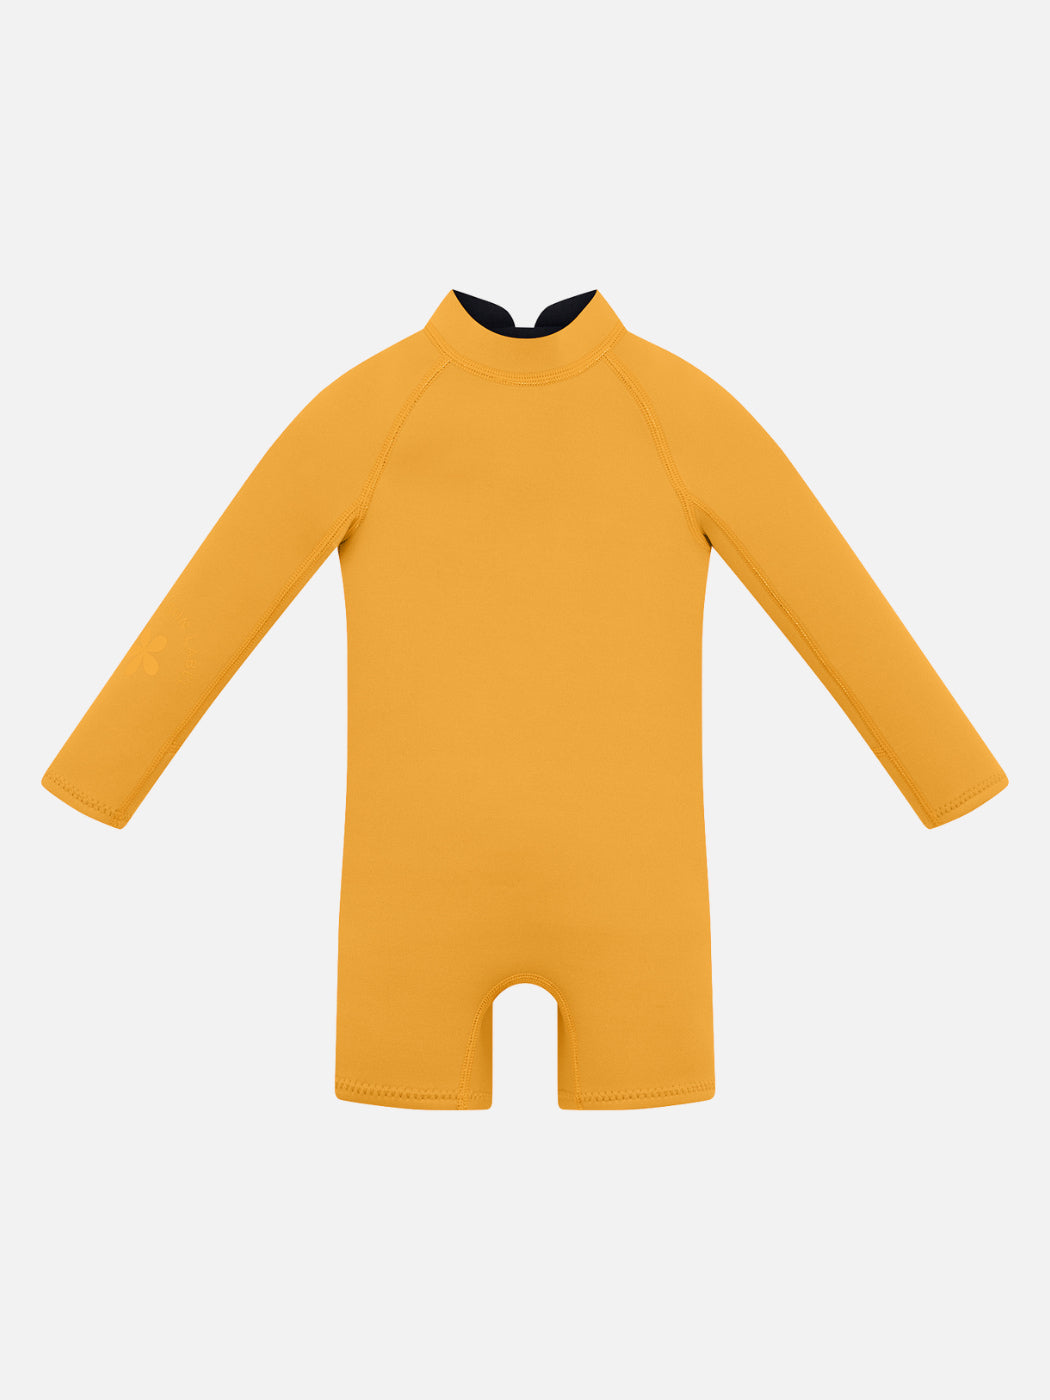 Kids and baby wetsuit with long arms in bright sunflower yellow